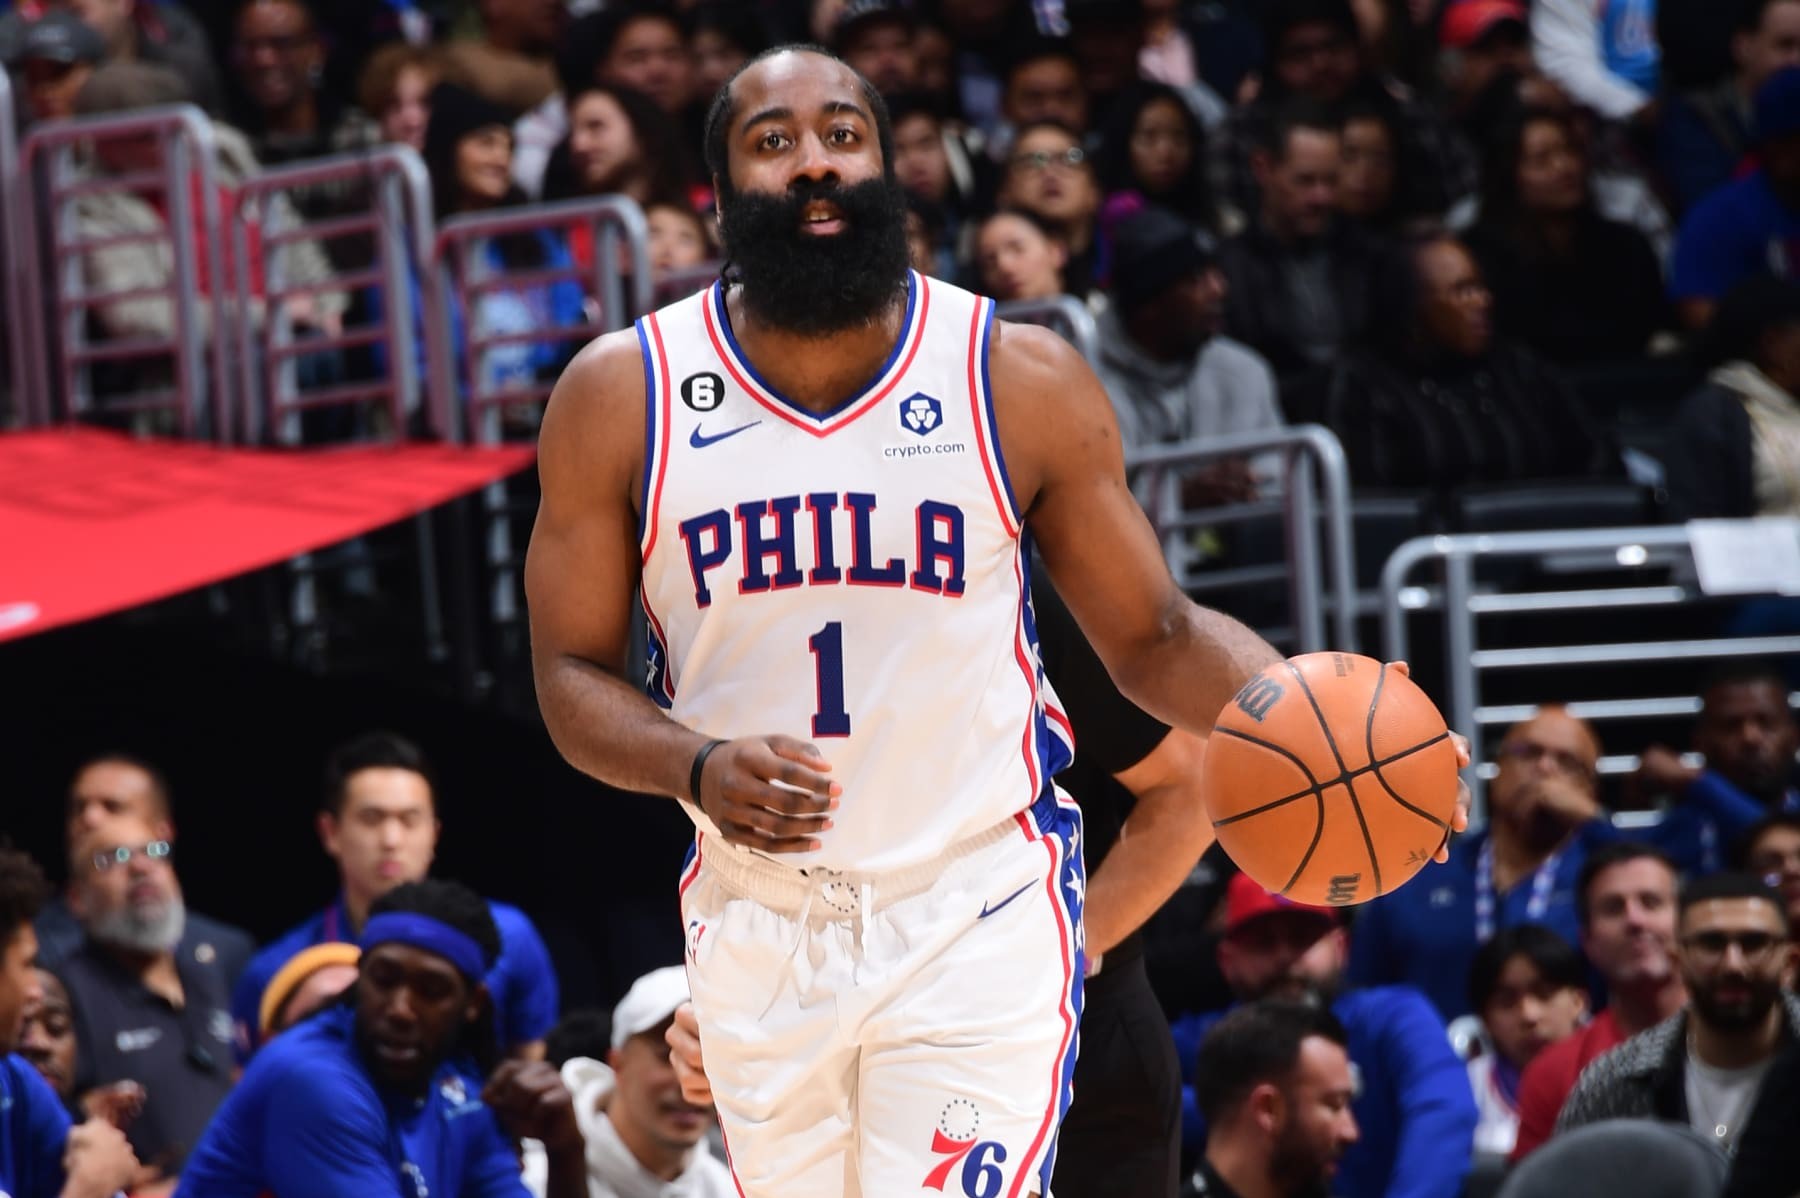 James Harden Says Current 76ers Team ‘Is Definitely the Best Chance I’ve Had to Win’